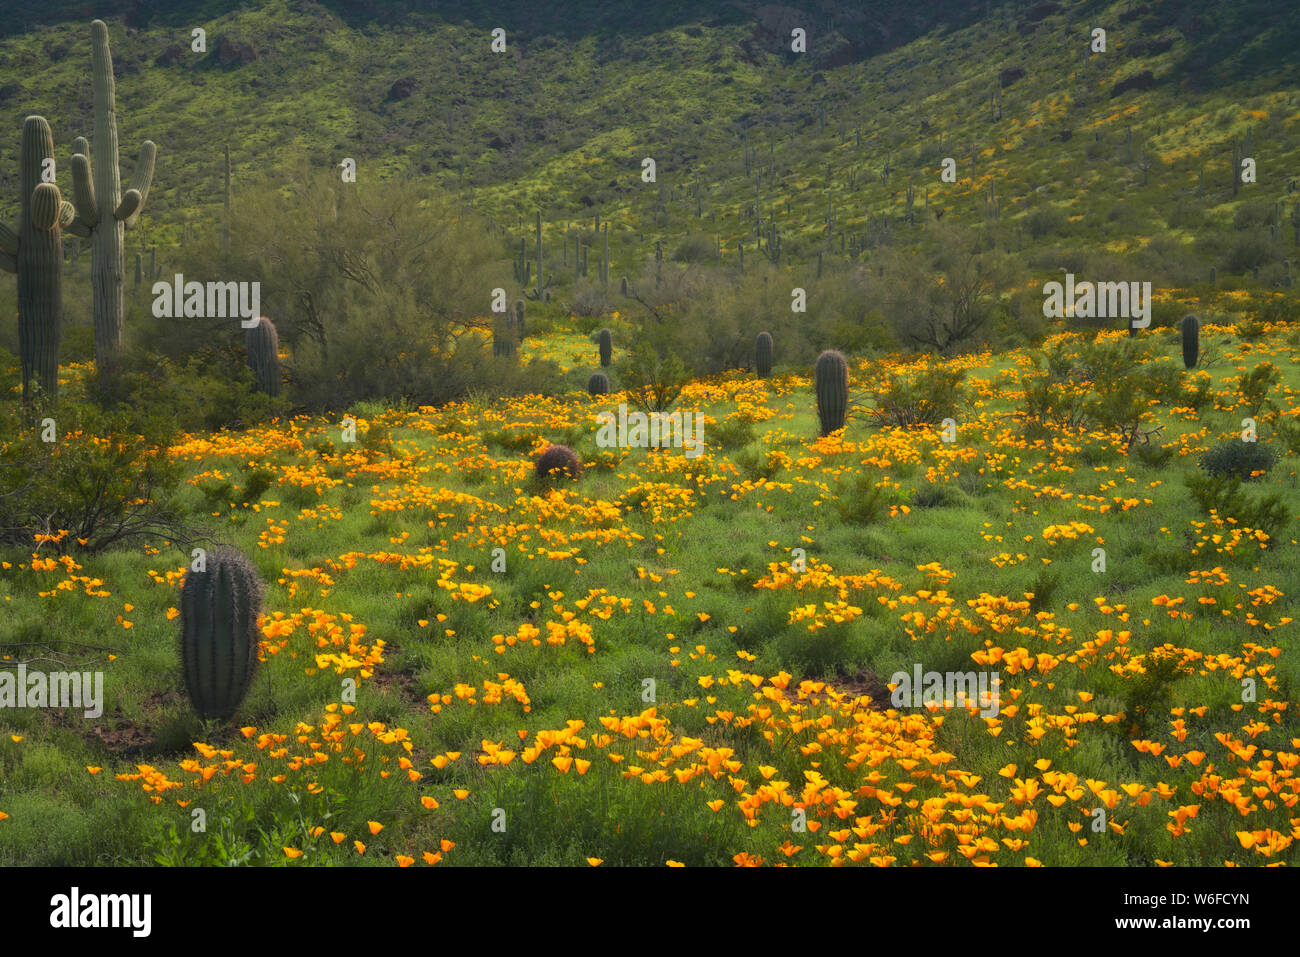 Winter El Nino rains create a Super Spring Bloom of Mexican poppies in southern Arizona’s Picacho Peak State Park. Stock Photo